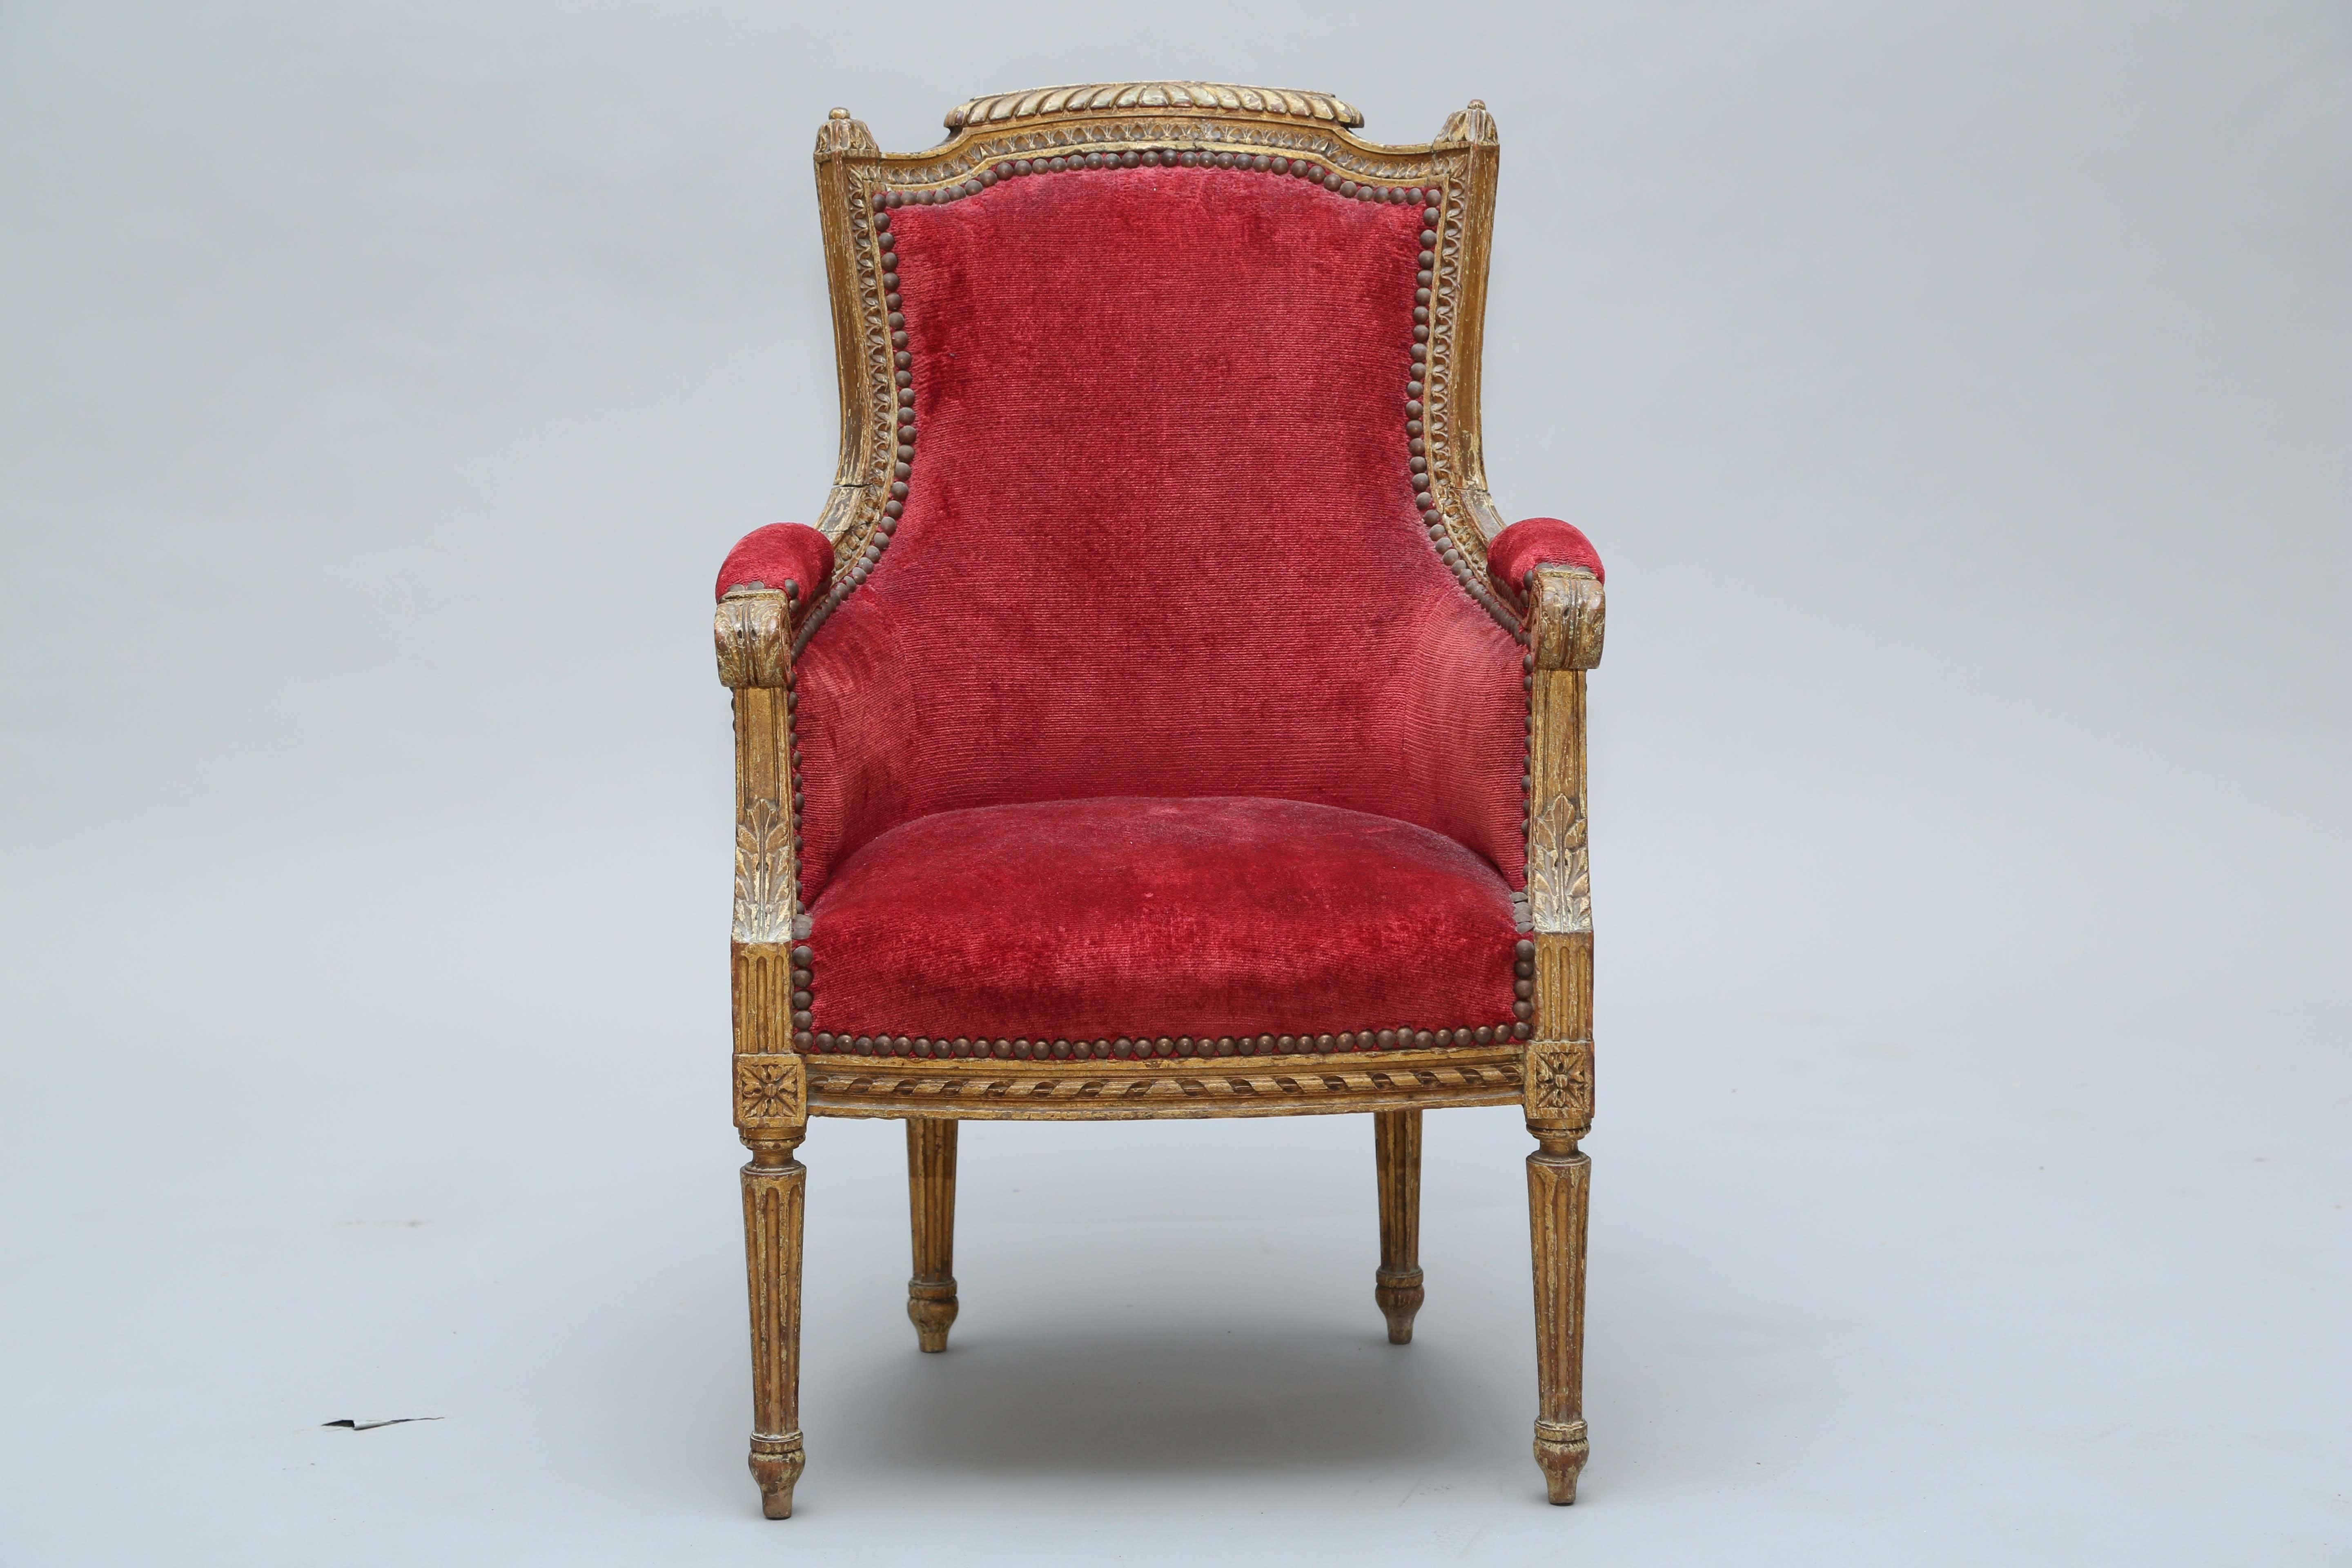 Child sized, Louis XVI bergere chair, having a channeled frame, carved with gadrooning, raised on round, tapering, fluted legs and ending in toupie feet.

Stock ID: D9335